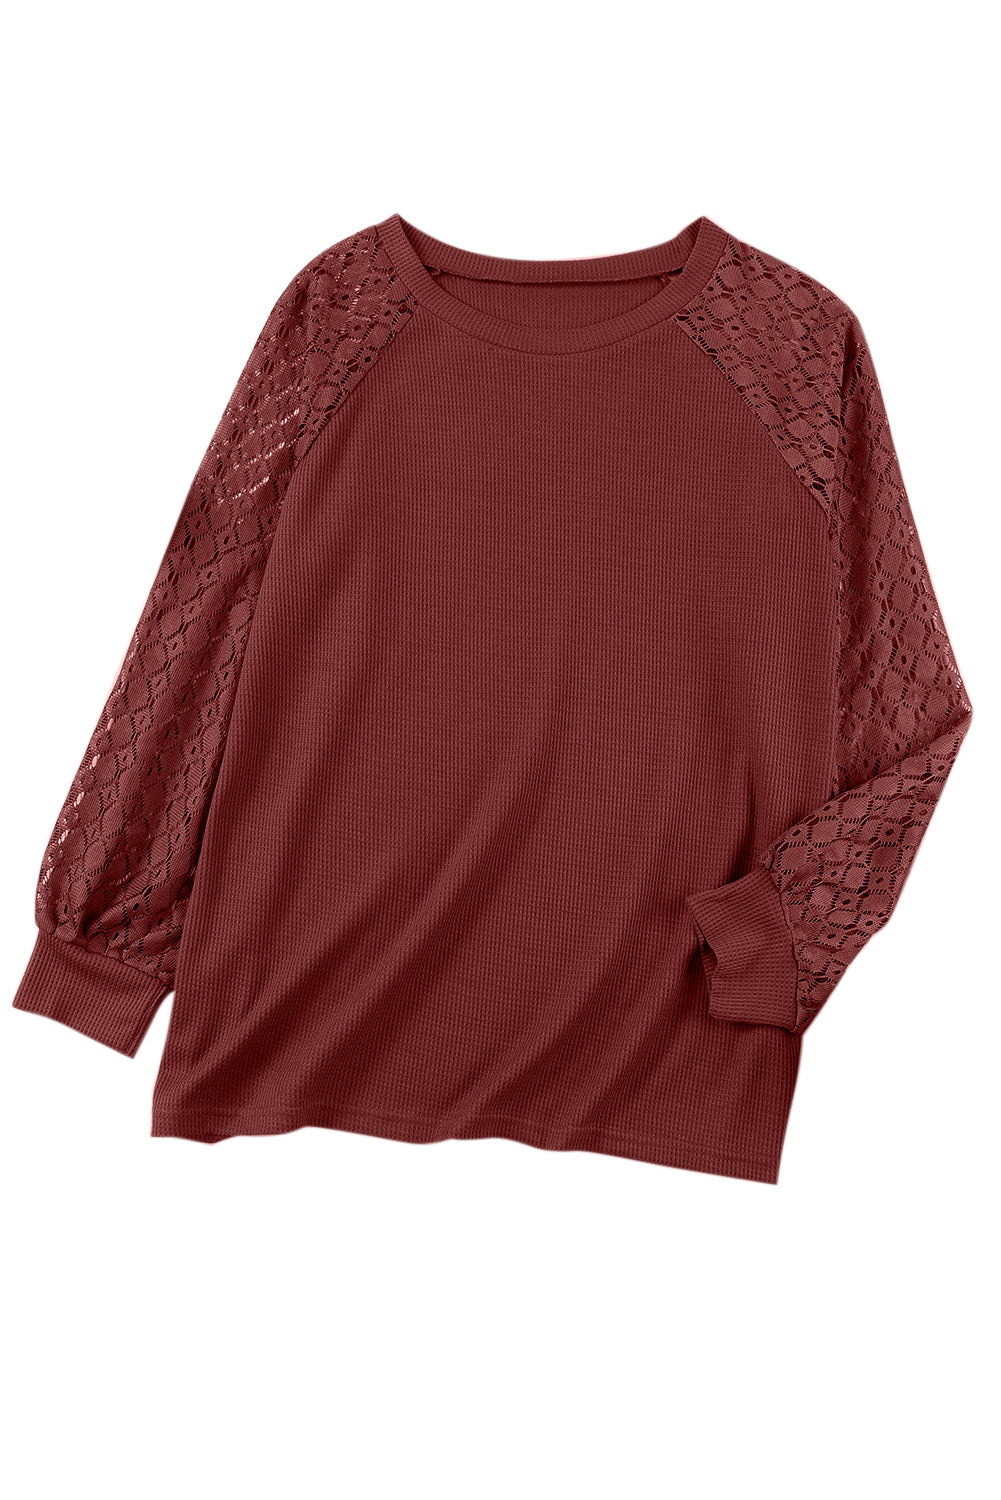 Online Only - Red Plus Size Contrast Lace Sleeve Waffle Knit Top